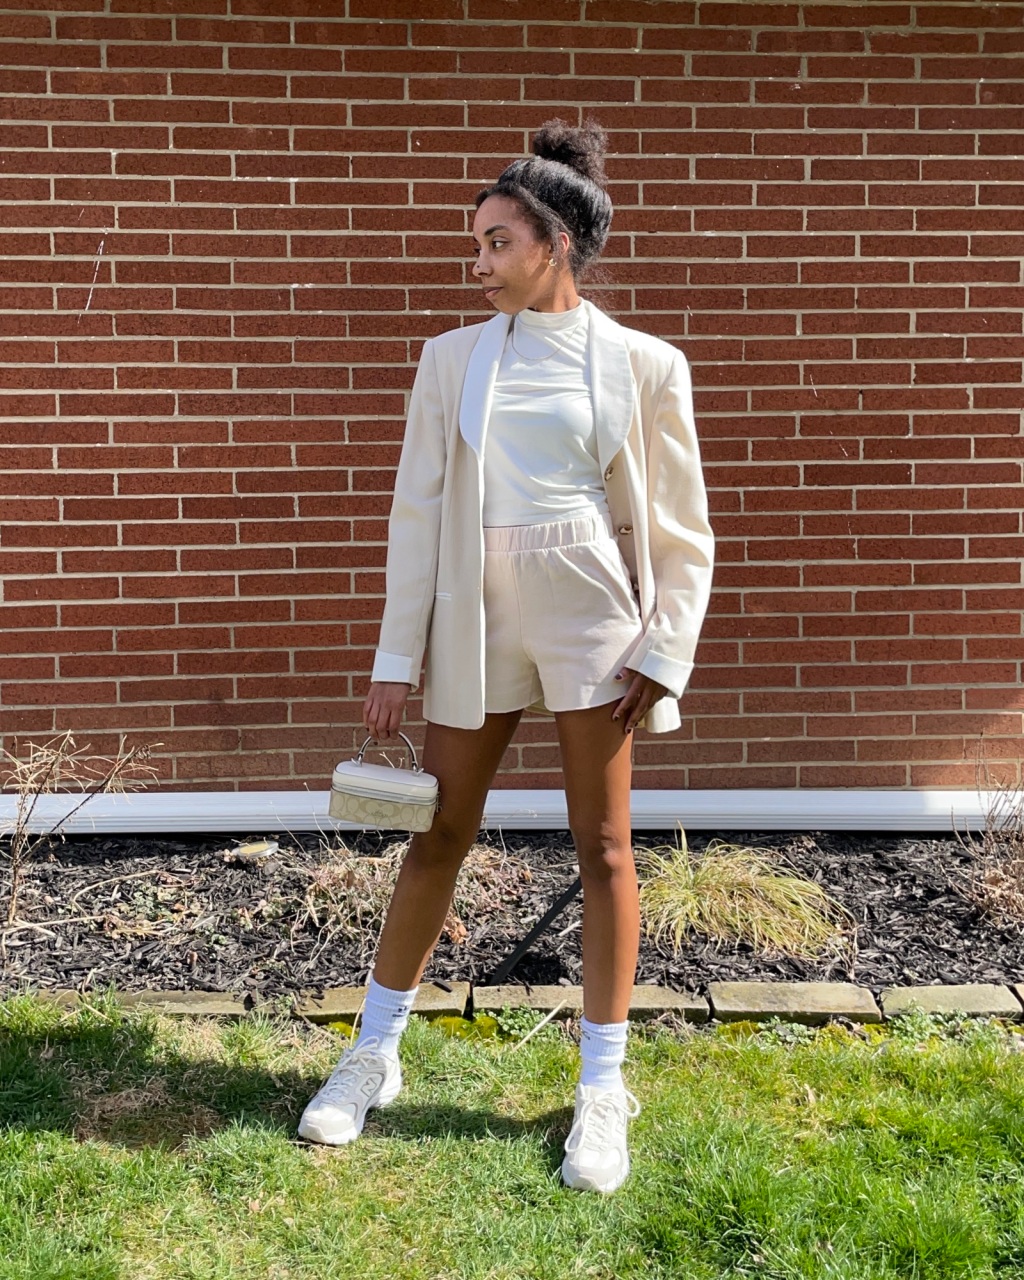 Styling an Athleisure Outfit With a Blazer